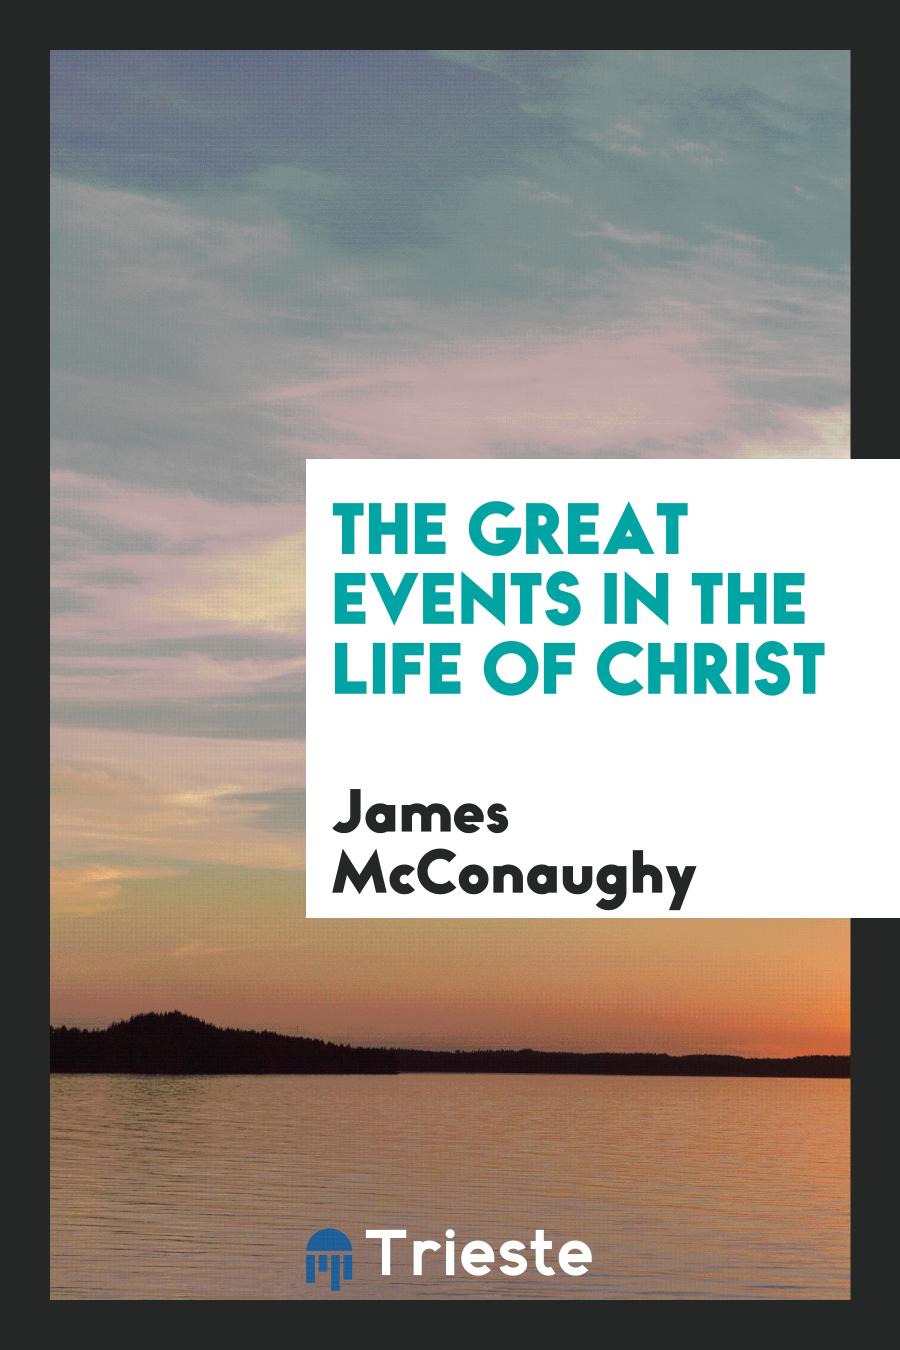 The Great Events in the Life of Christ